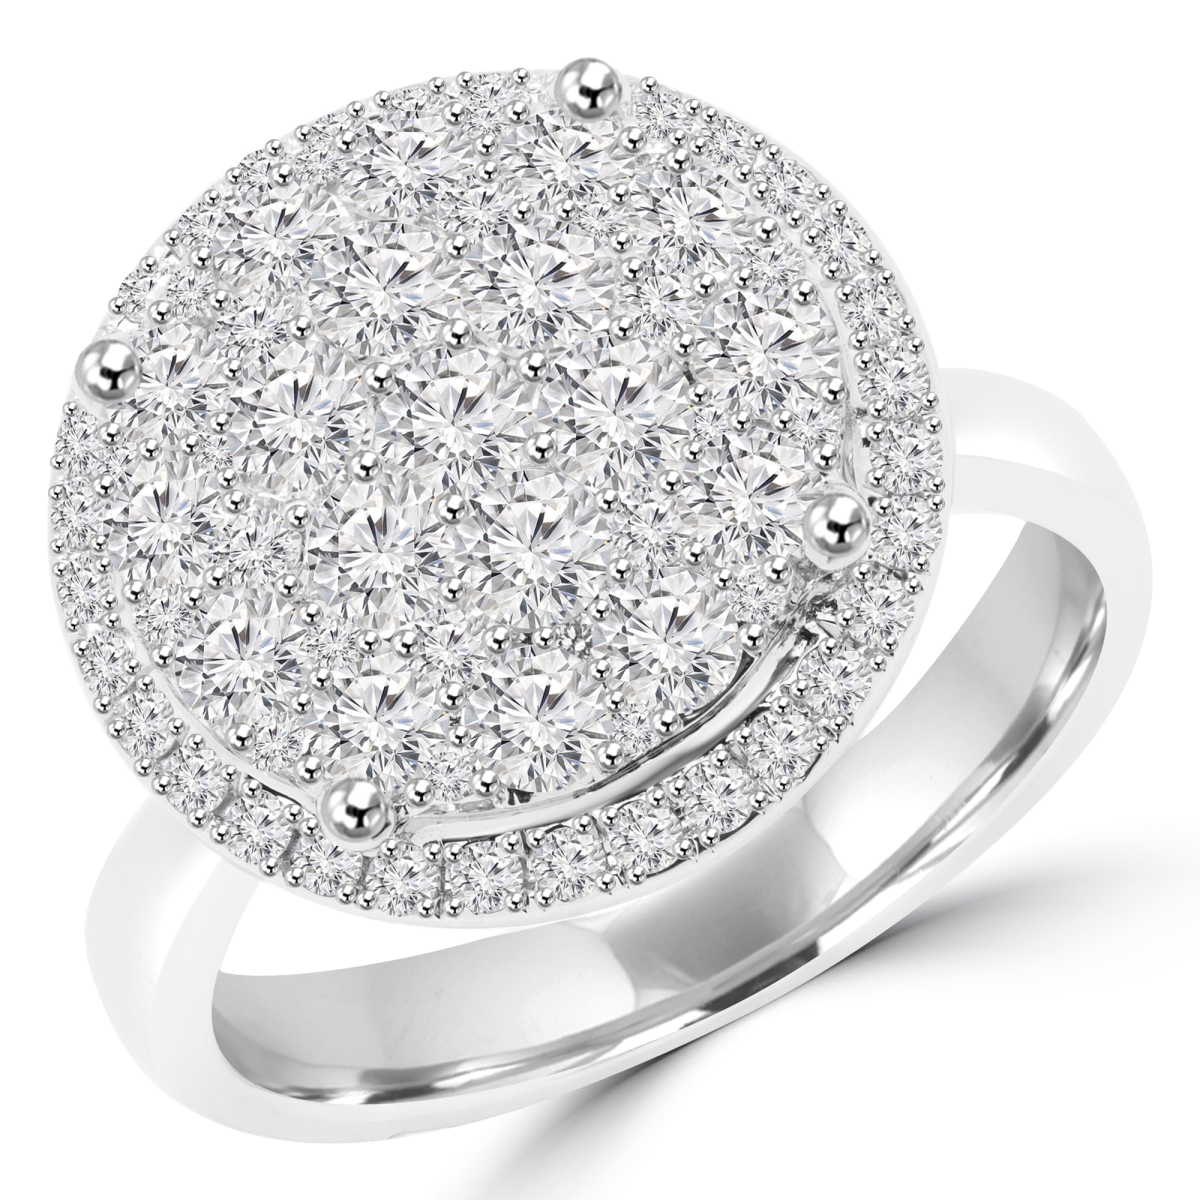 MD160293-3.75 1.5 CTW Pave Set Diamond Cluster Fashion Engagement Ring in 18K White Gold - Size 3.75 -  Majesty Diamonds